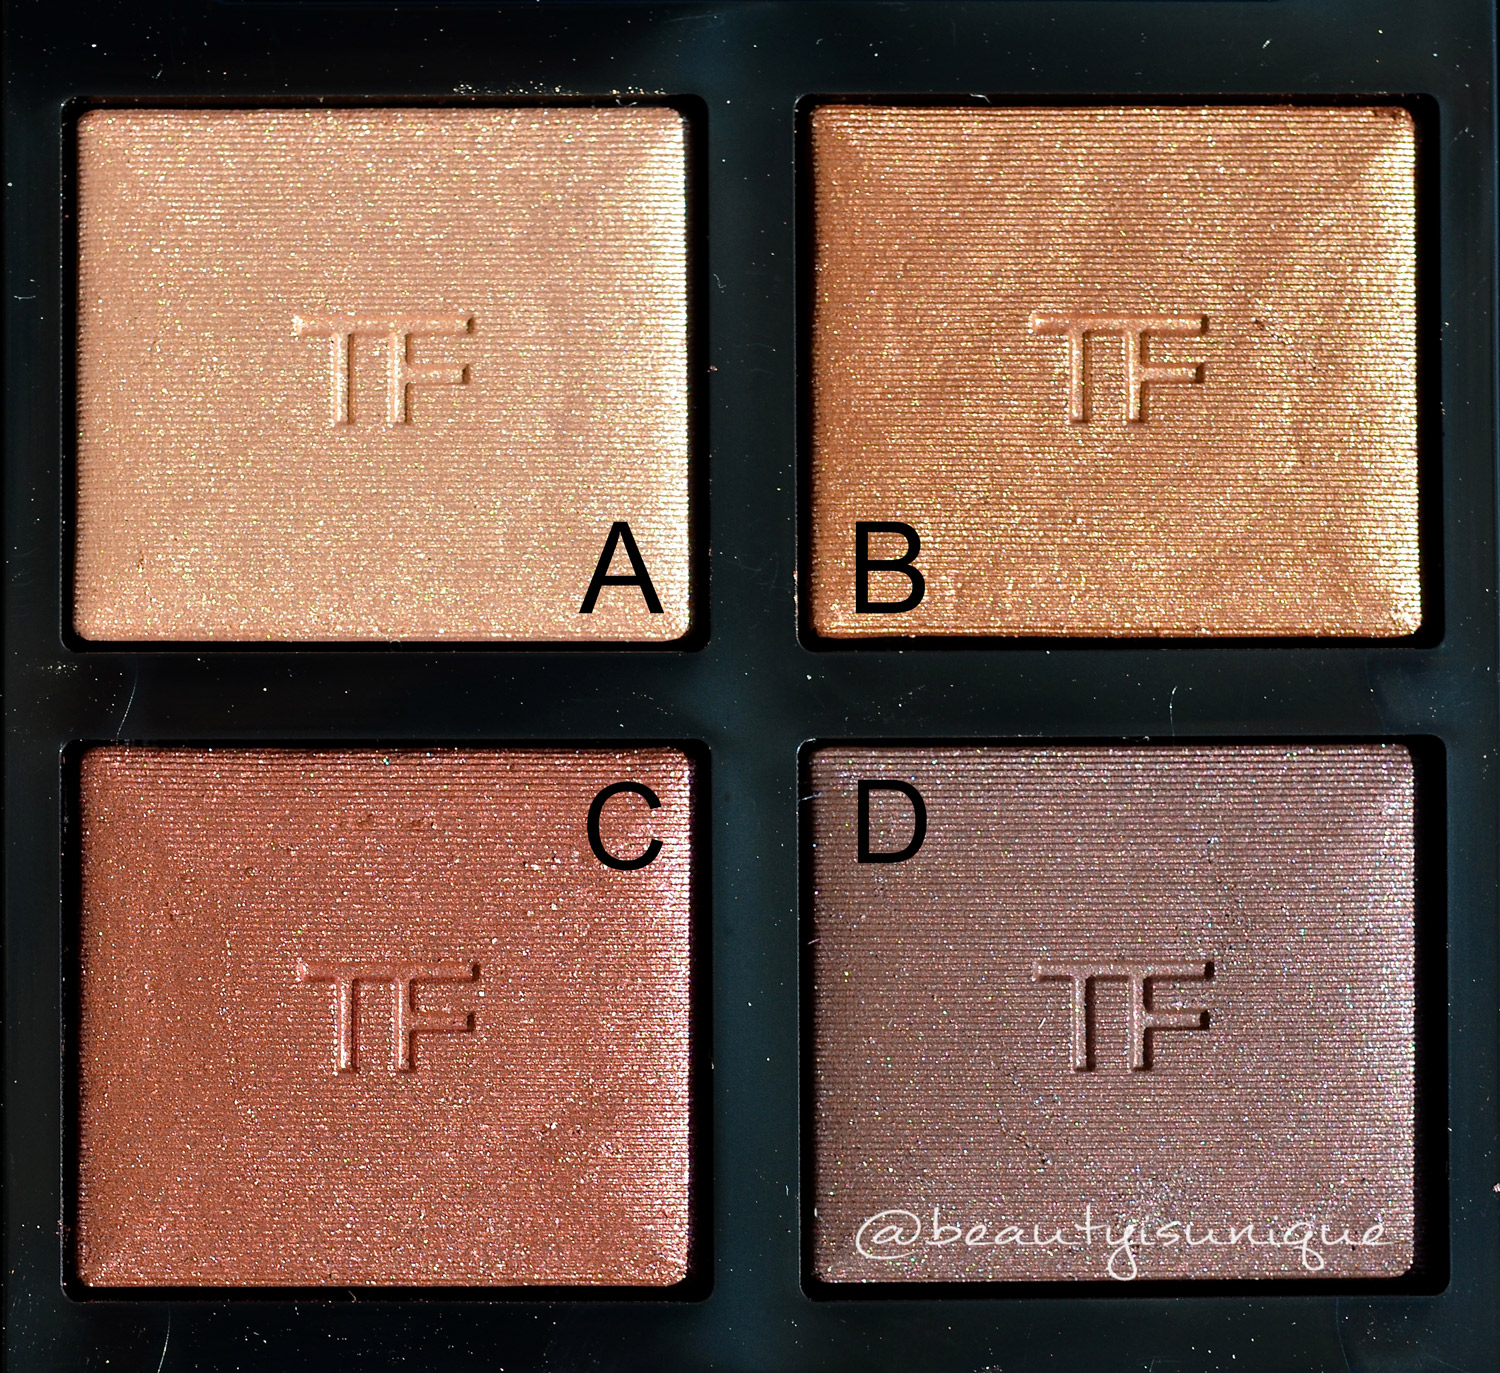 Tom Ford Honeymoon Palette swatches